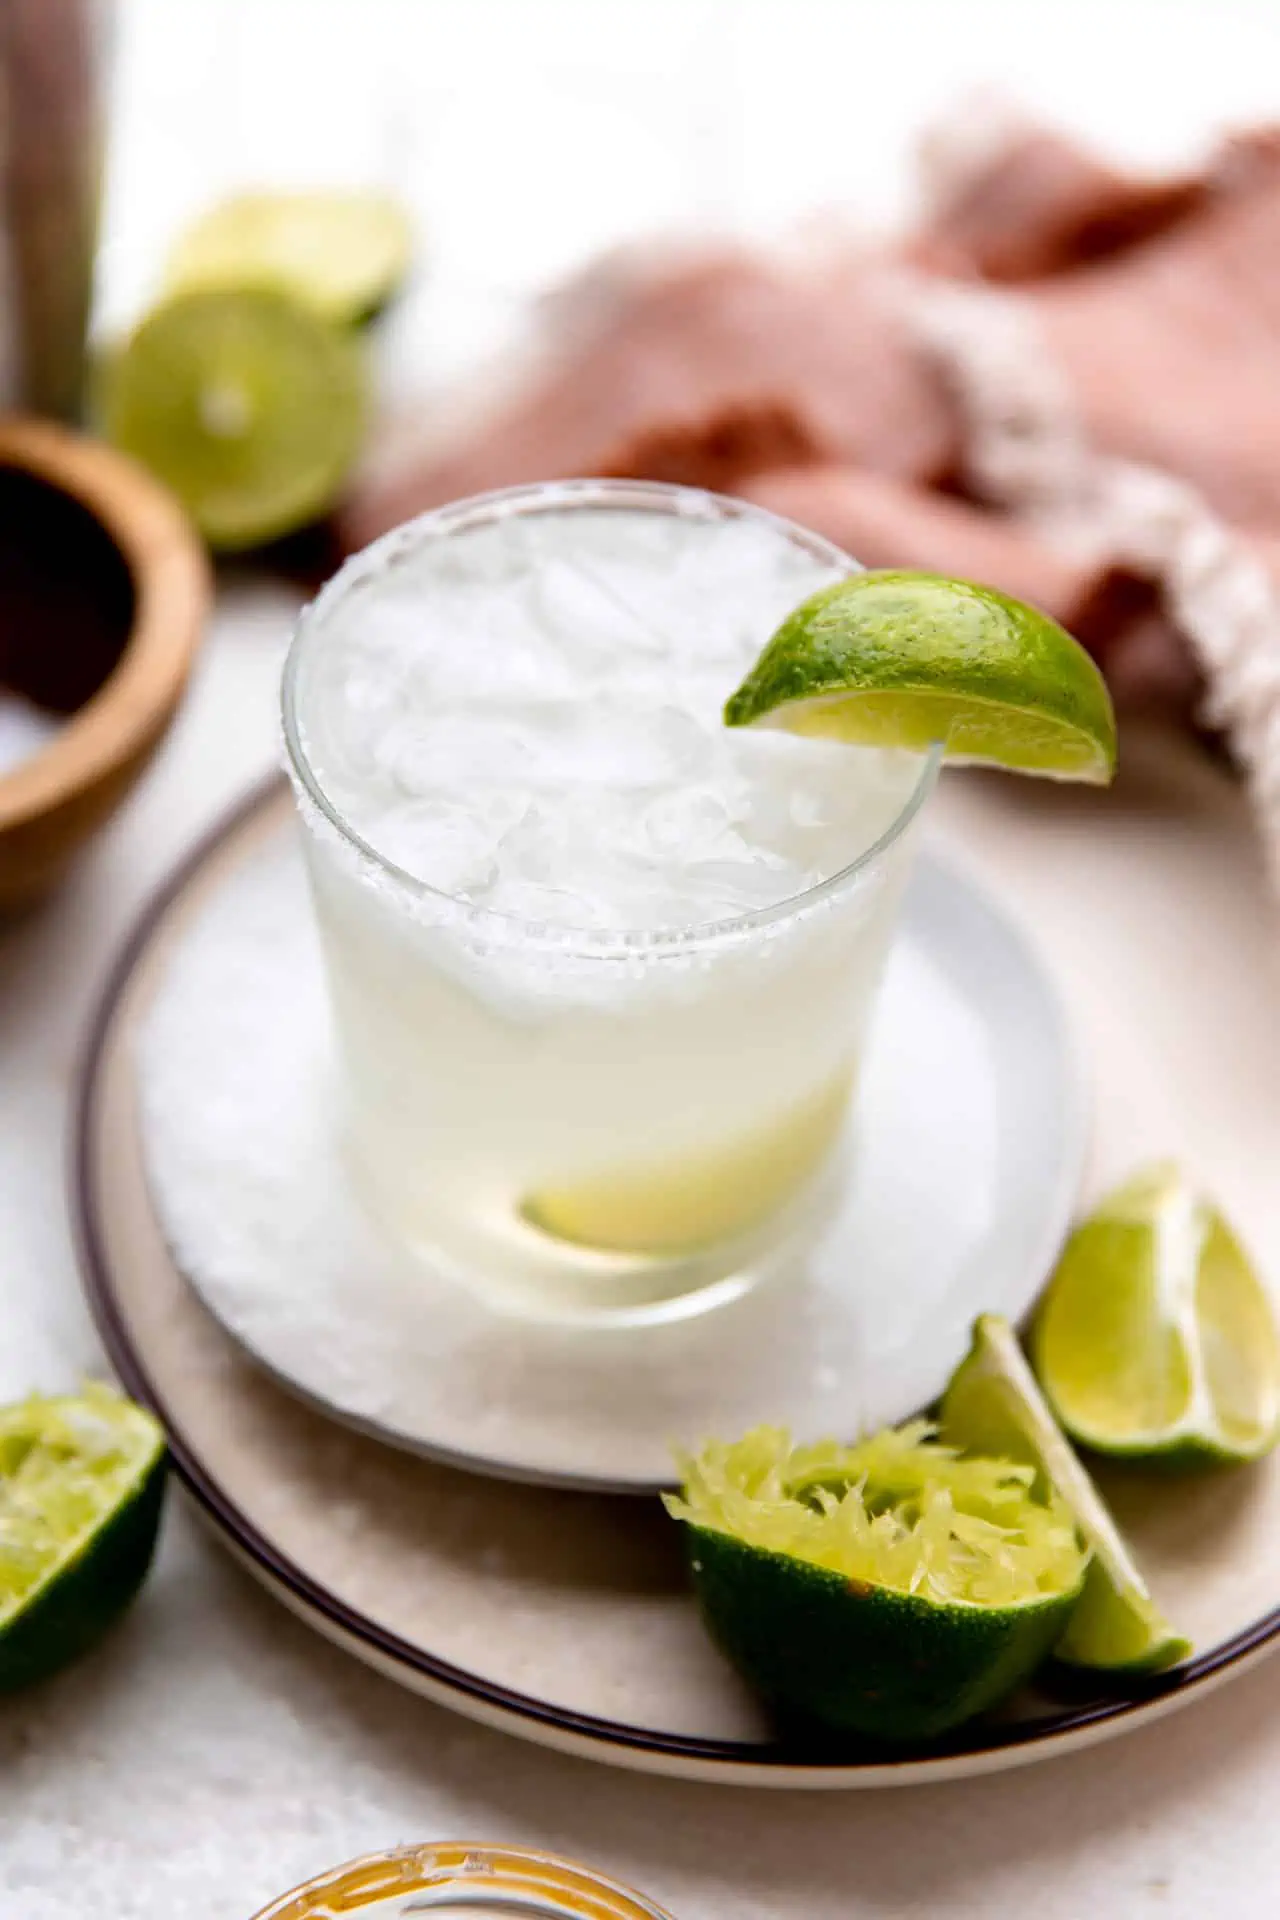 Classic, lime margarita served on the rocks in a glass garnished with a lime wedge.